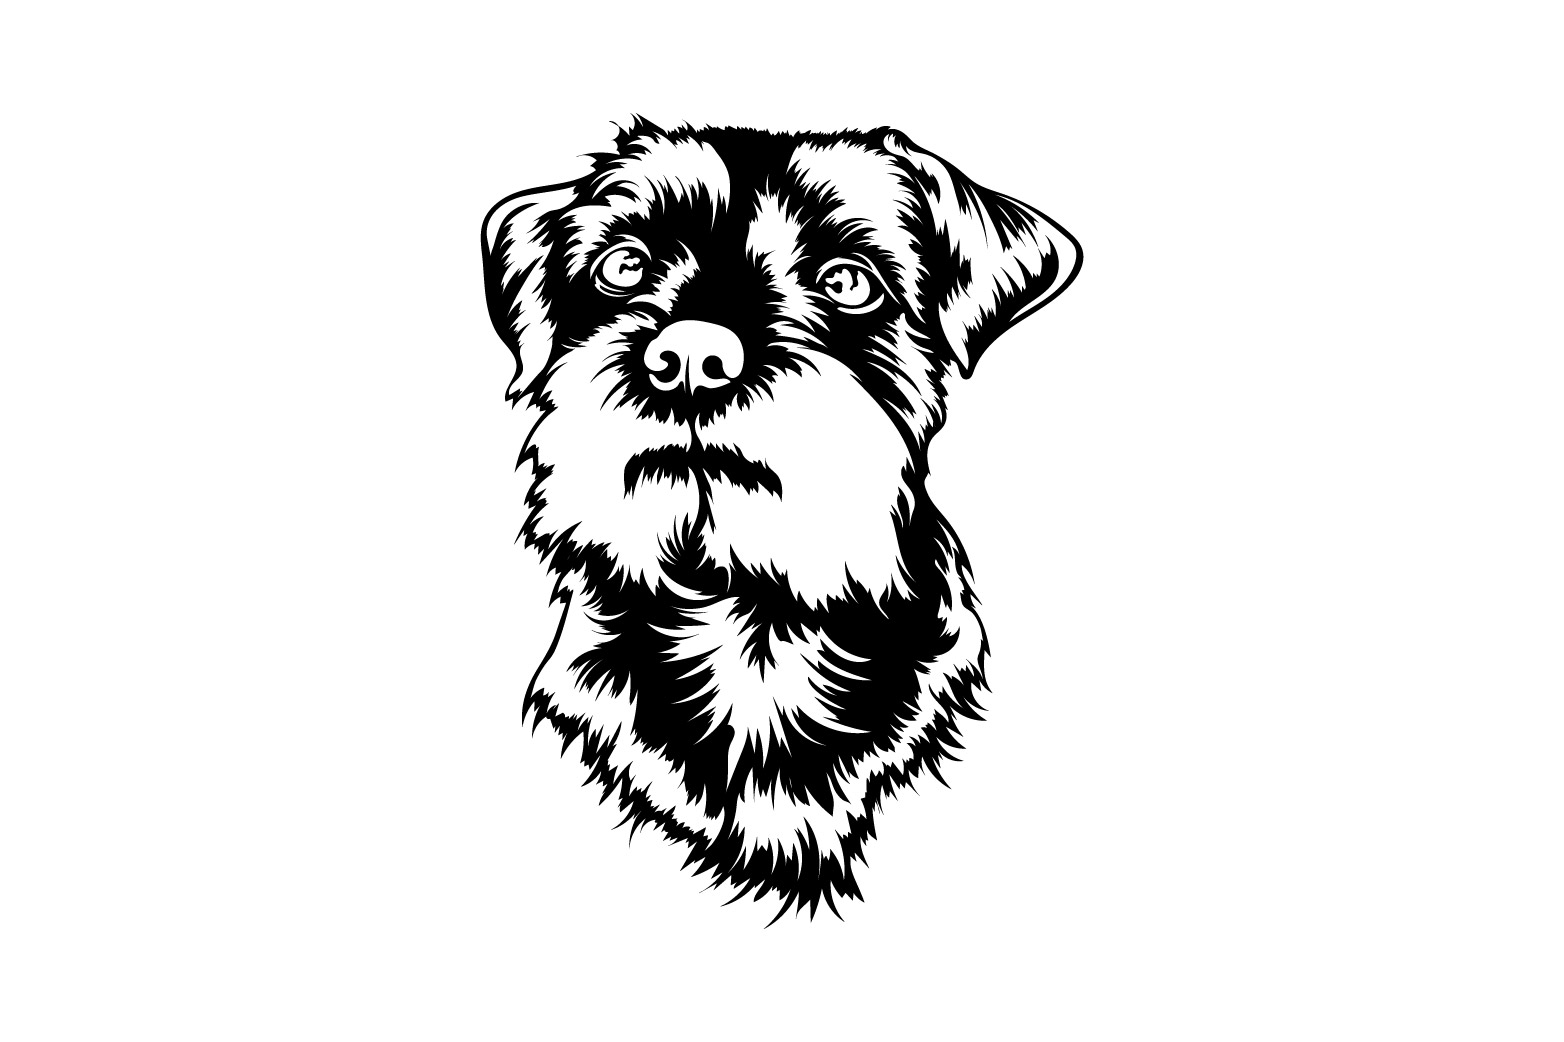 Black and white drawing of a dog's face.